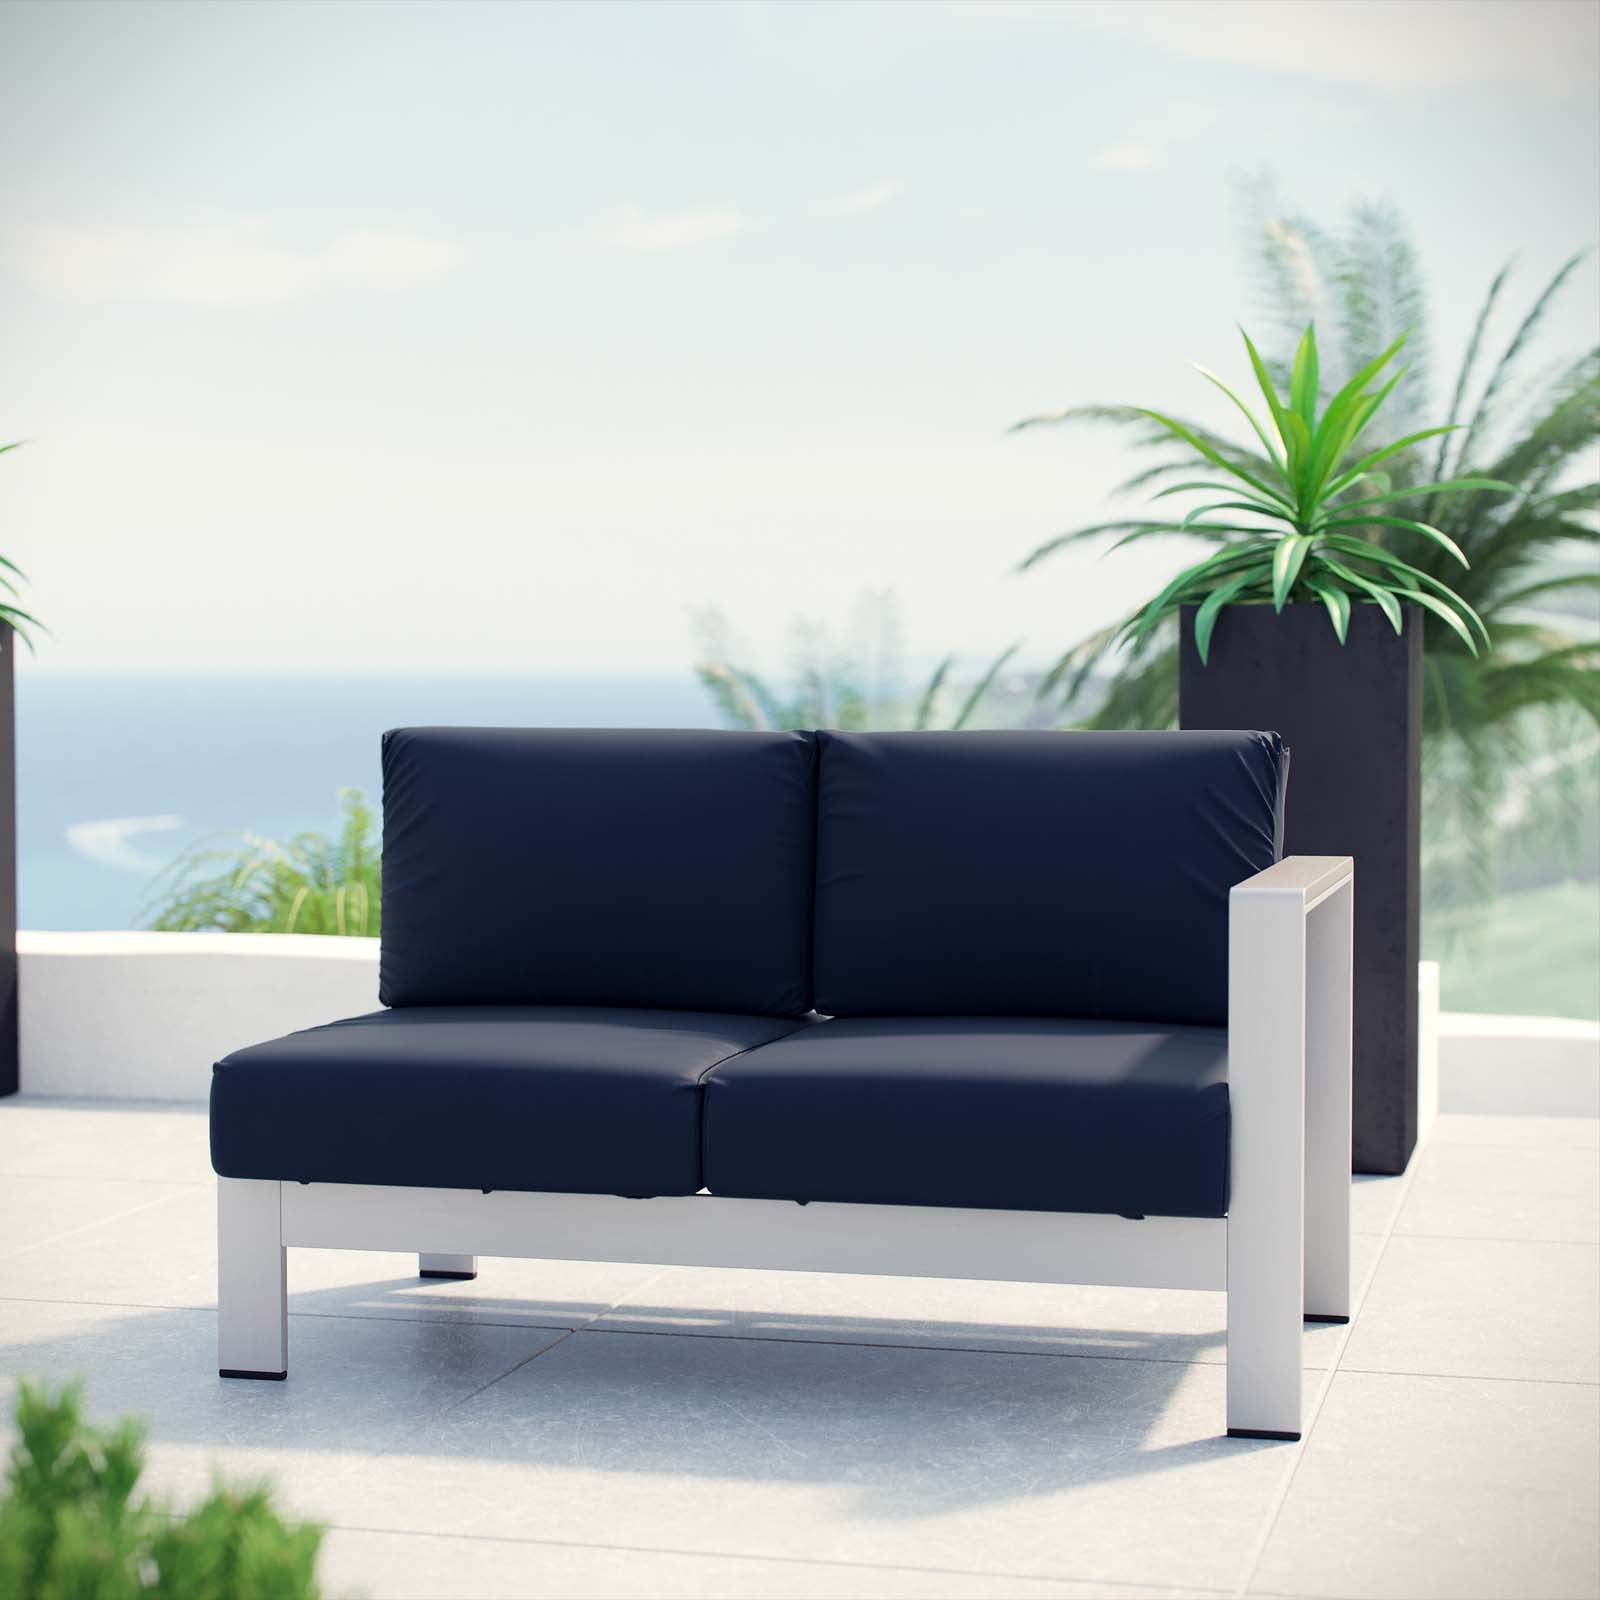 Modway Outdoor Sofas - Shore Right-Arm Corner Sectional Outdoor Patio Aluminum Loveseat Silver Navy